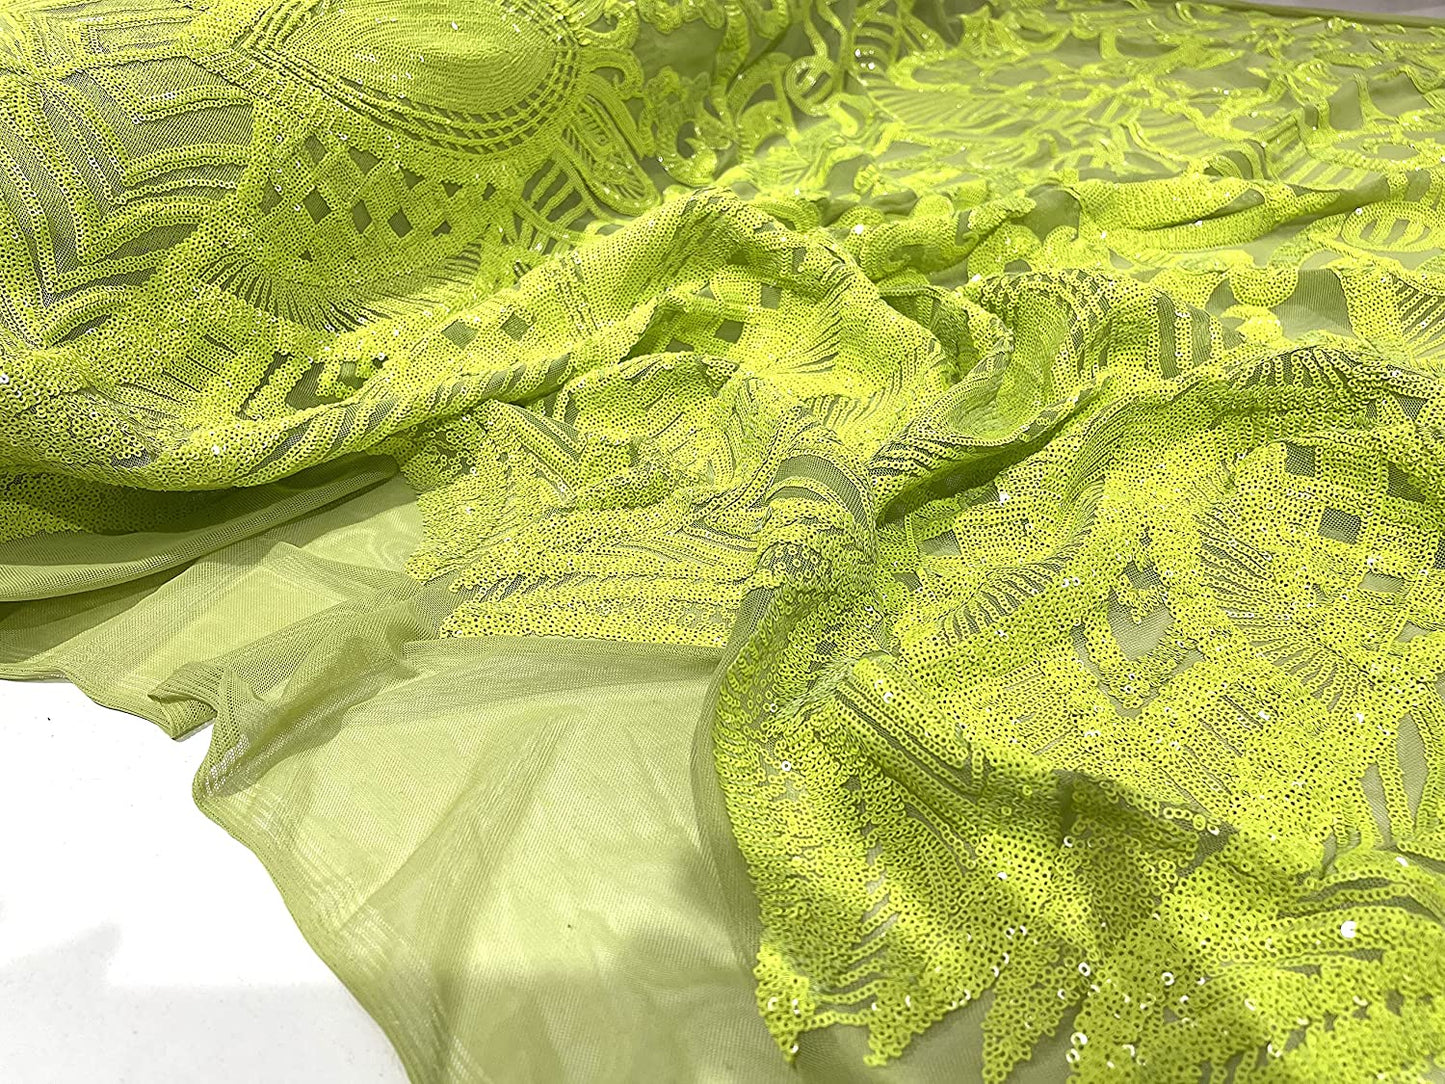 Iridescent Royalty Design On A 4 Way Stretch Mesh/Prom Fabric (1 Yard, Neon Green on Green Mesh)